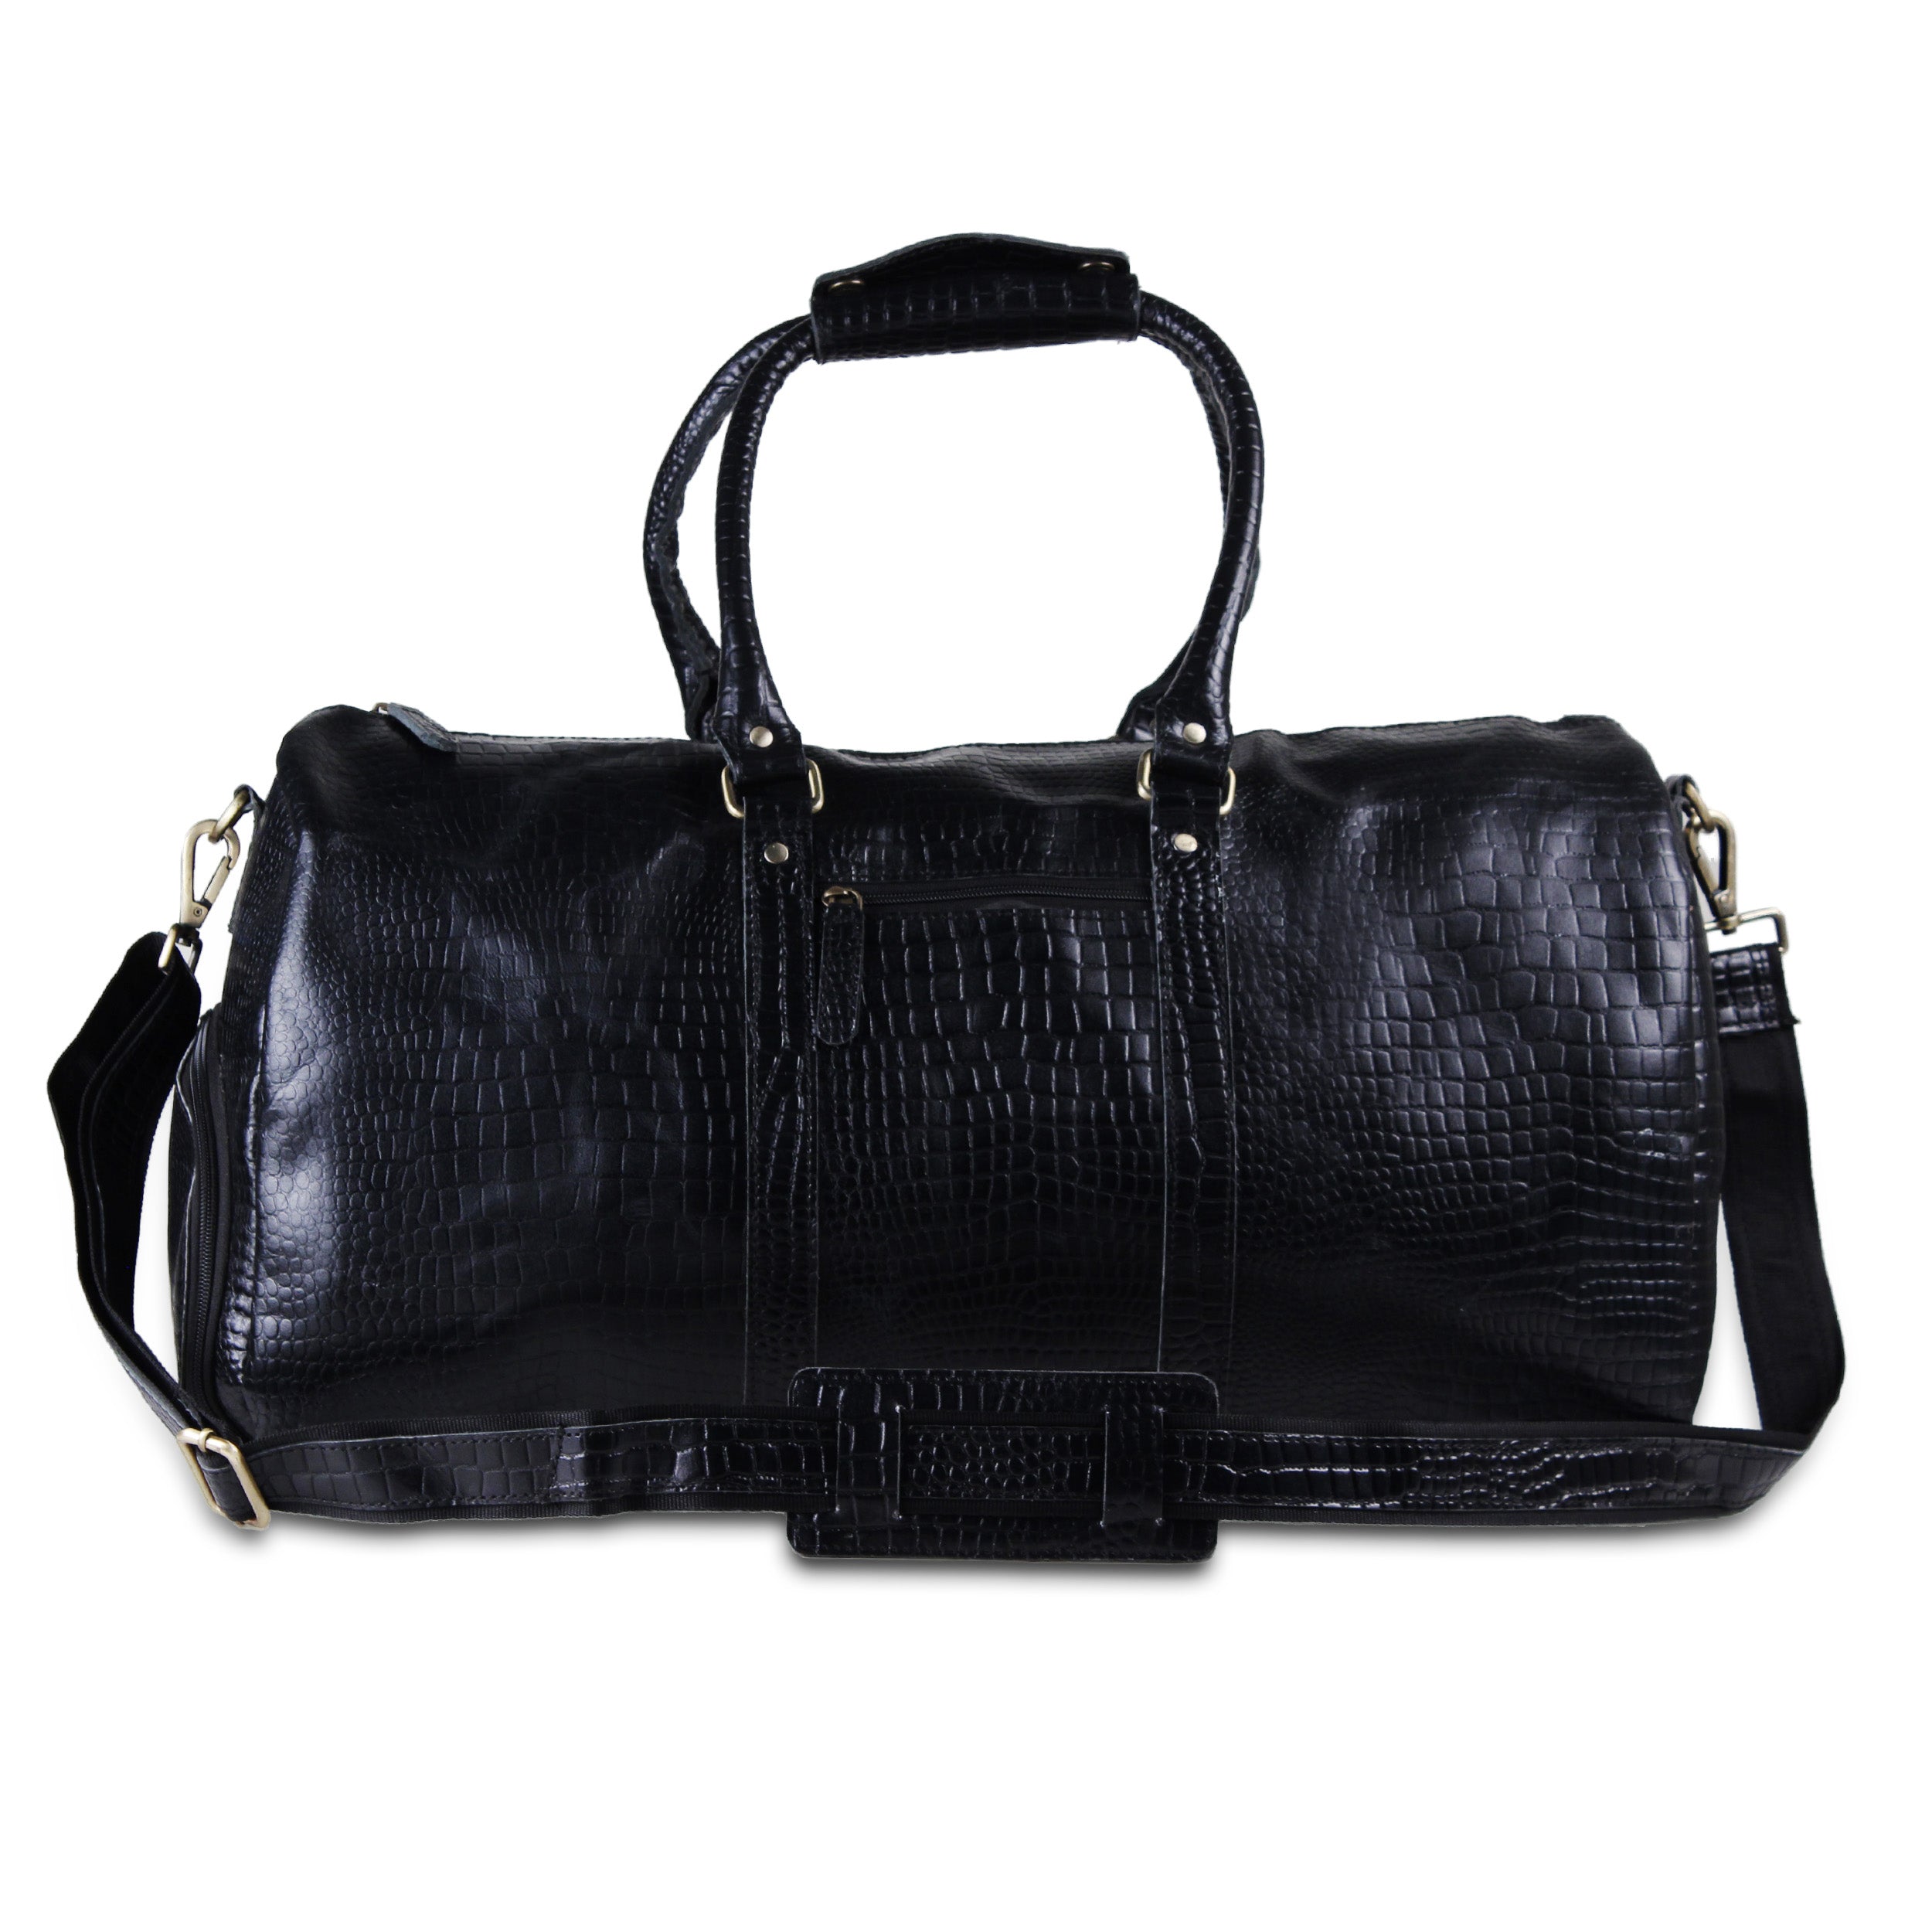 Front View of Textured Black Leather Messenger Top handle Duffle Bag